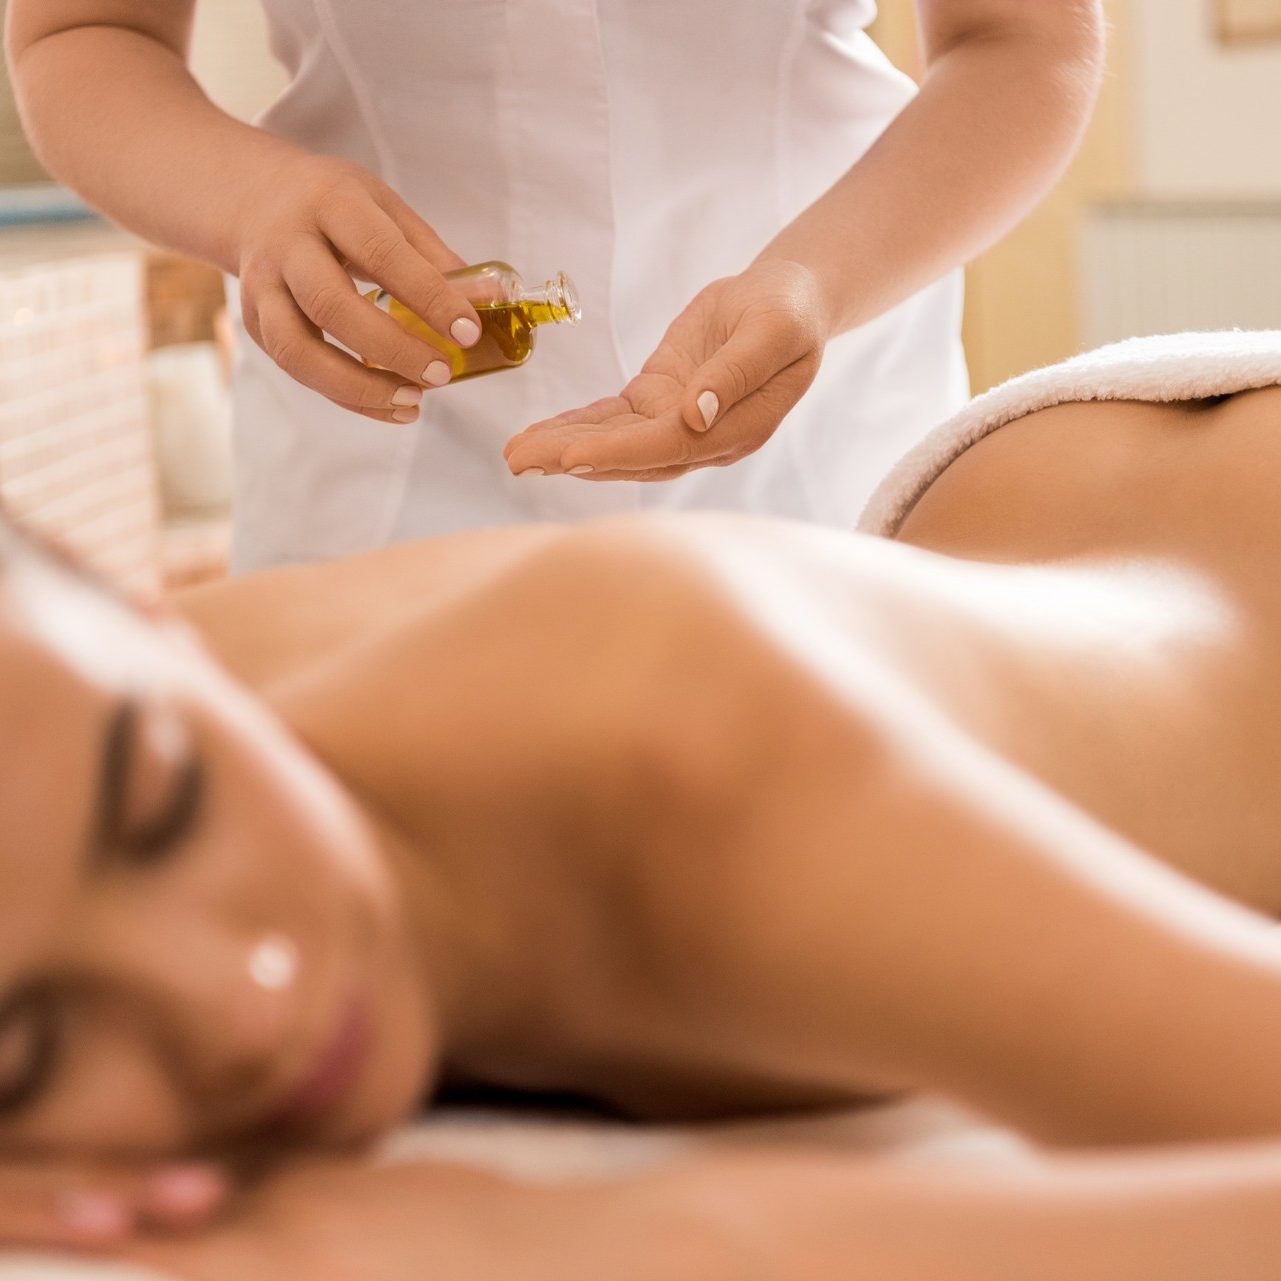 massage therapist making massage with body oil for woman in spa salon